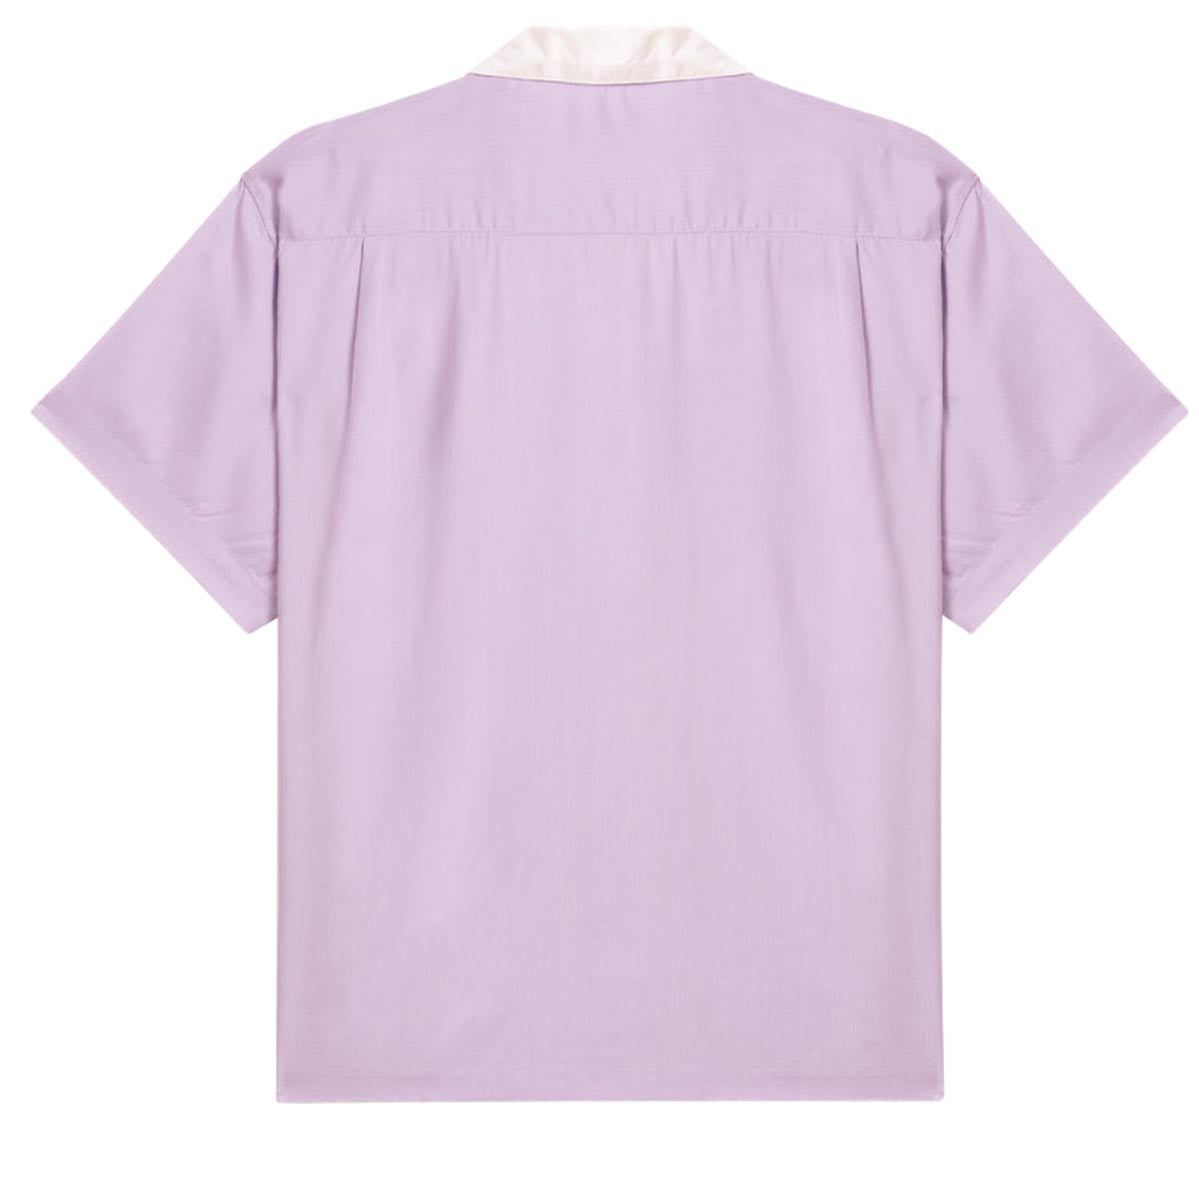 Obey Badger Woven Shirt - Orchid Petal image 2